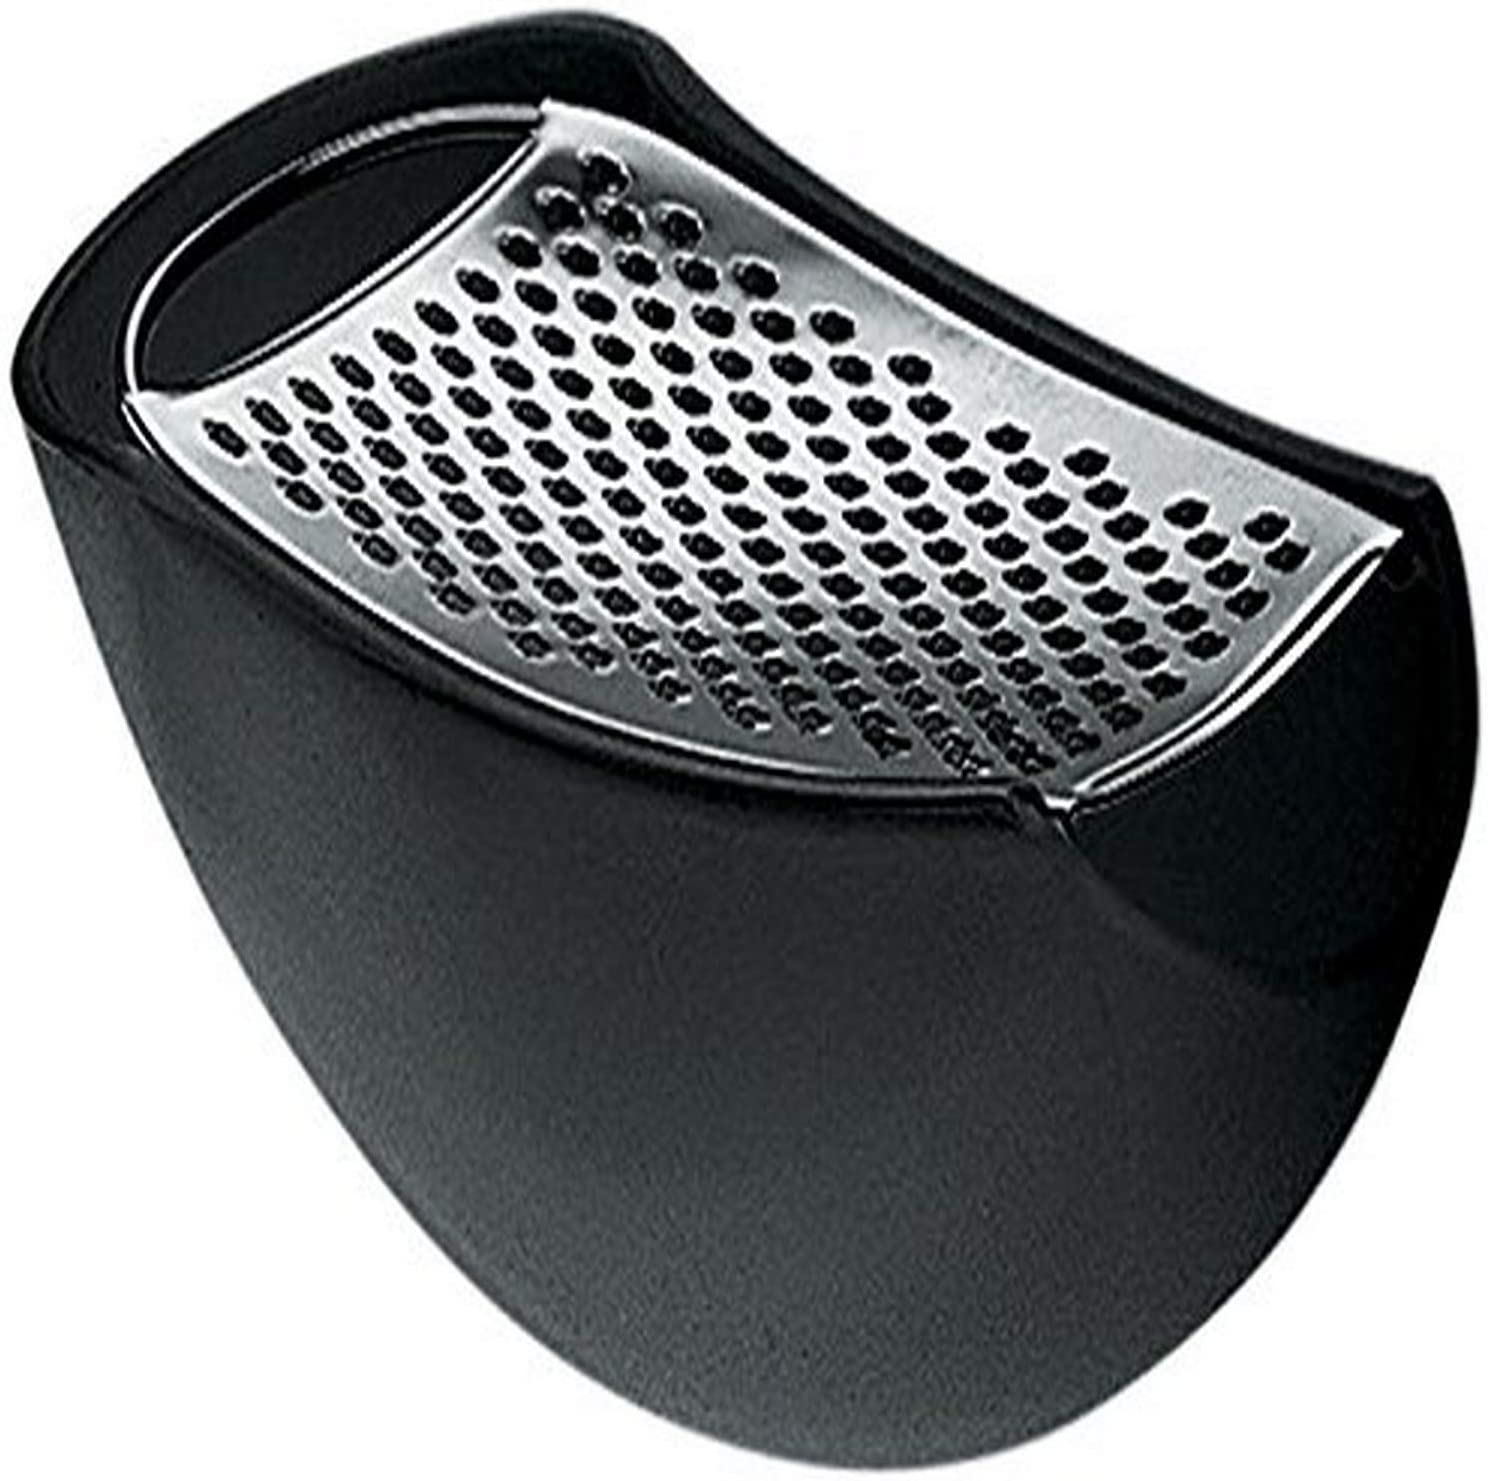 A Di Alessi Parmenide Grater with Cheese Cellar in Thermoplastic Resin, Black and Steel Mirror Polished